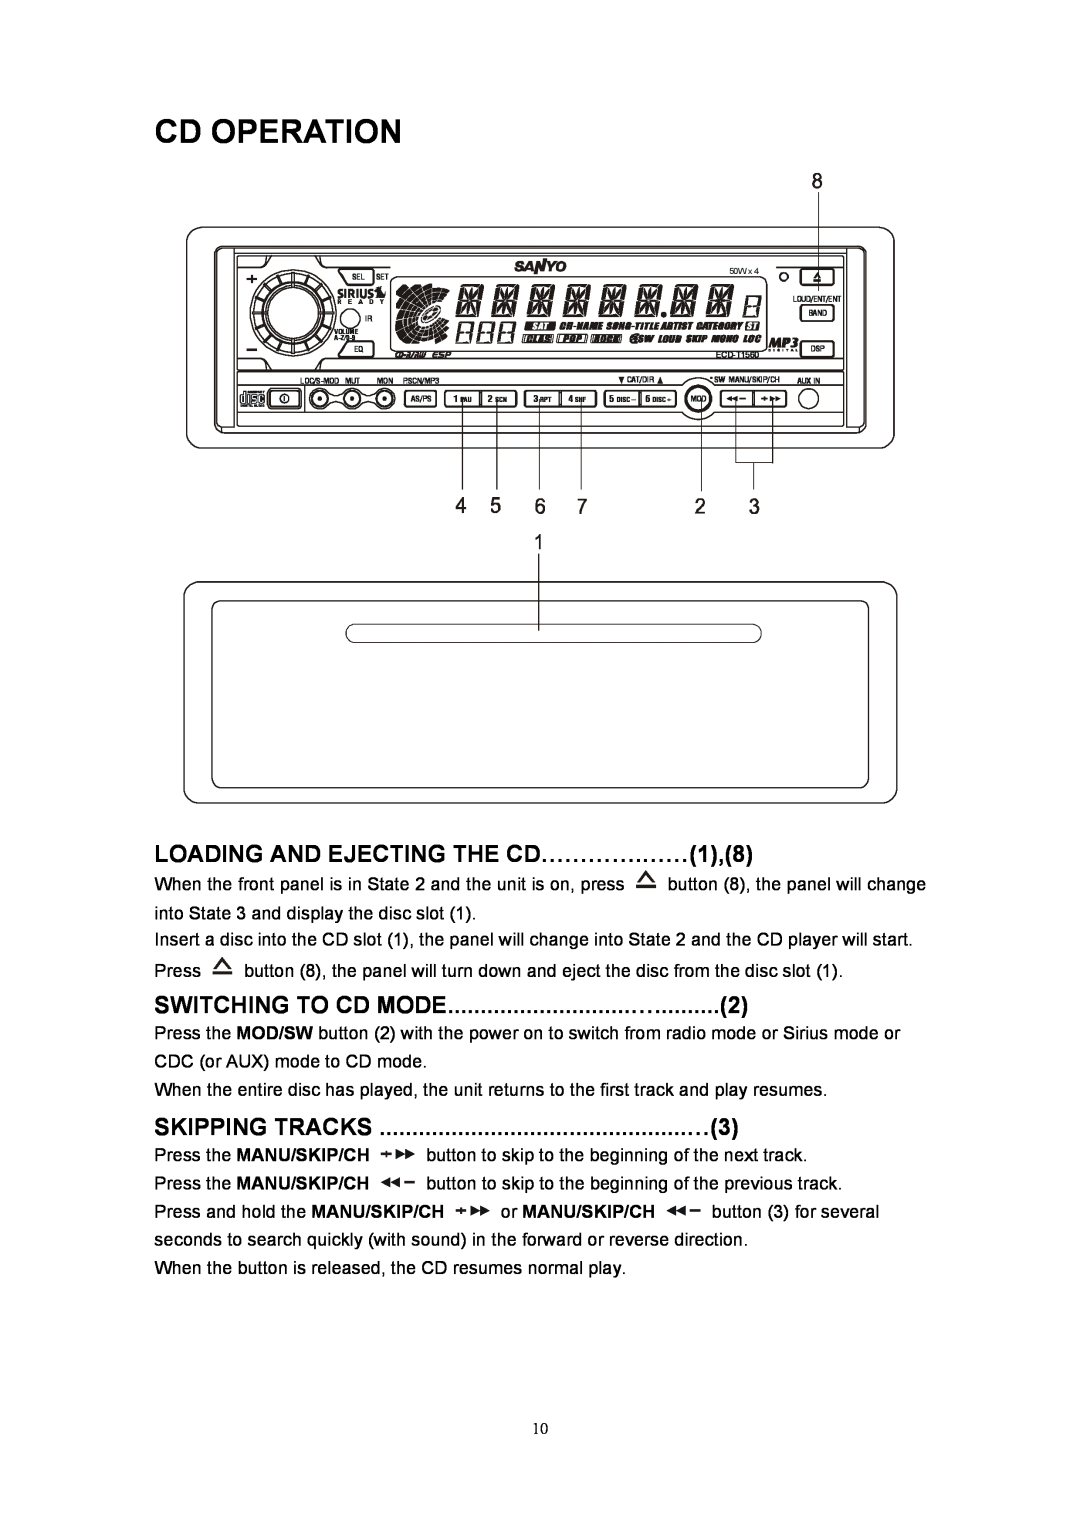 Sanyo ECD-T1560 manual Cd Operation, LOADING AND EJECTING THE CD………….……1,8 